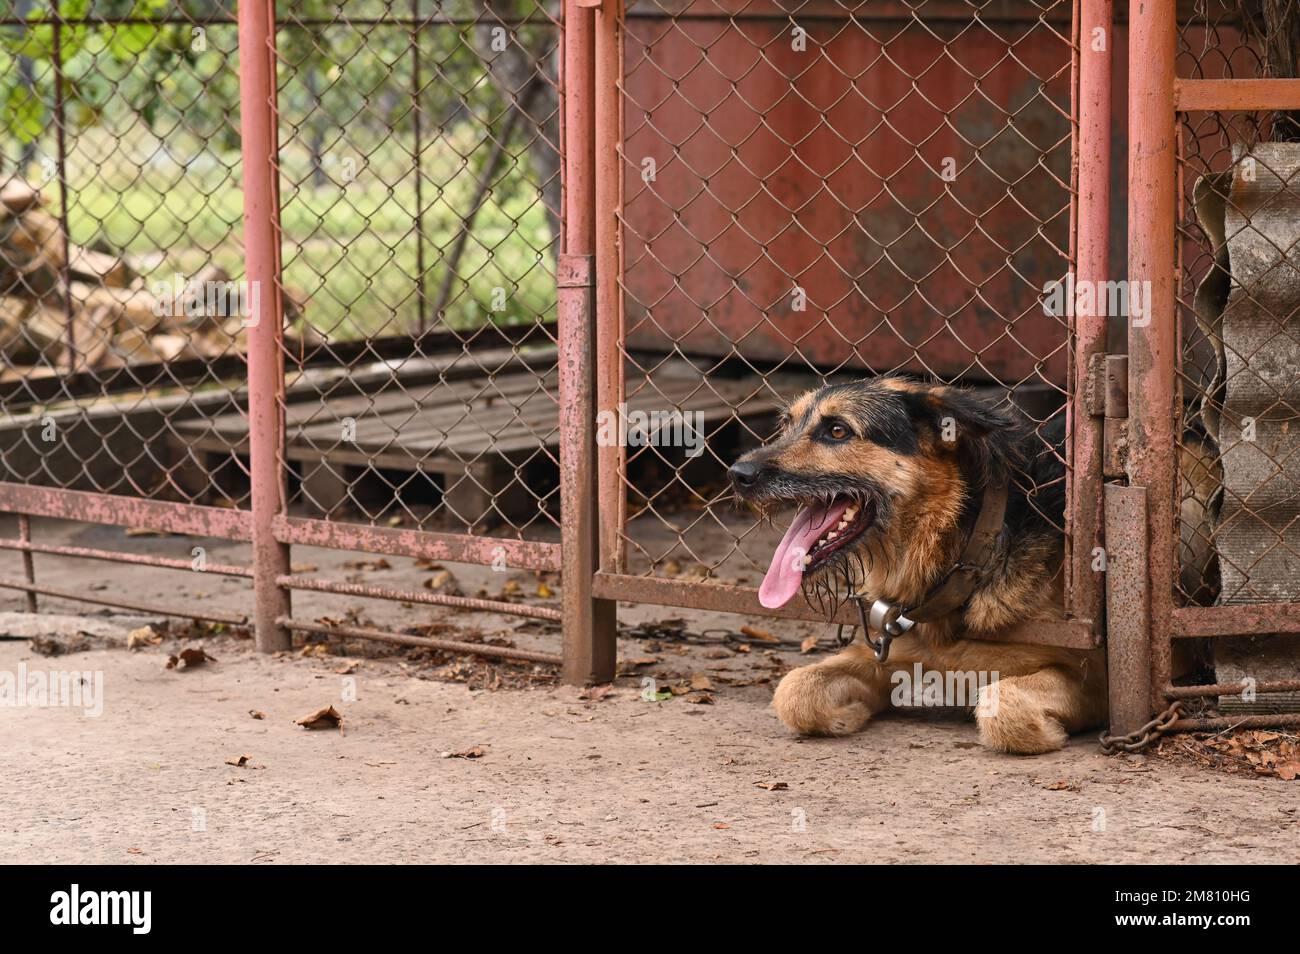 the dog is in a pen behind bars Stock Photo